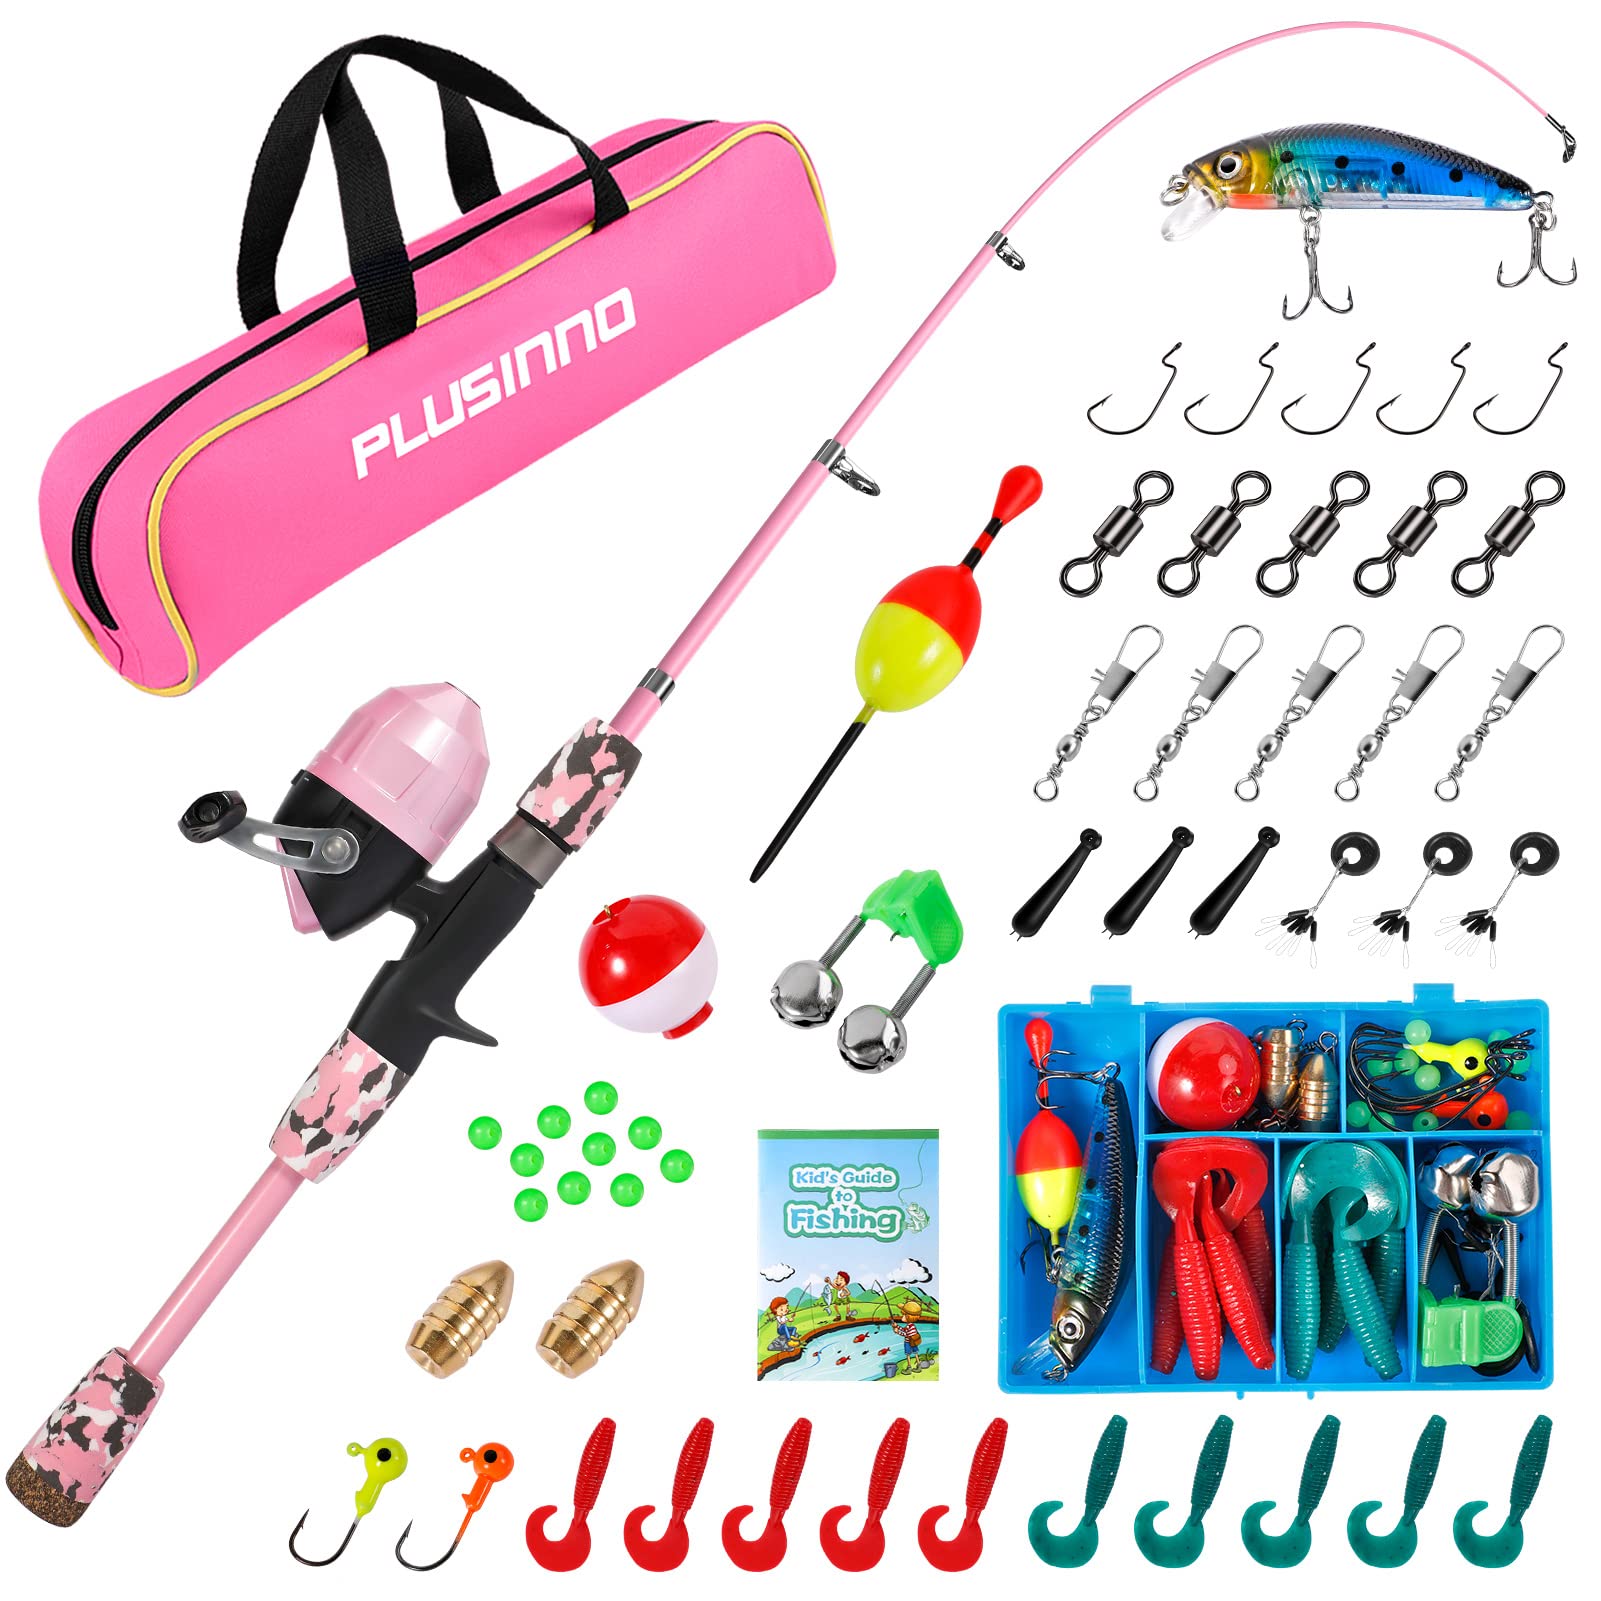 Kids Push Button Spincast Fishing Pole Starter Kit Pink Rod and Reel 4 Ft